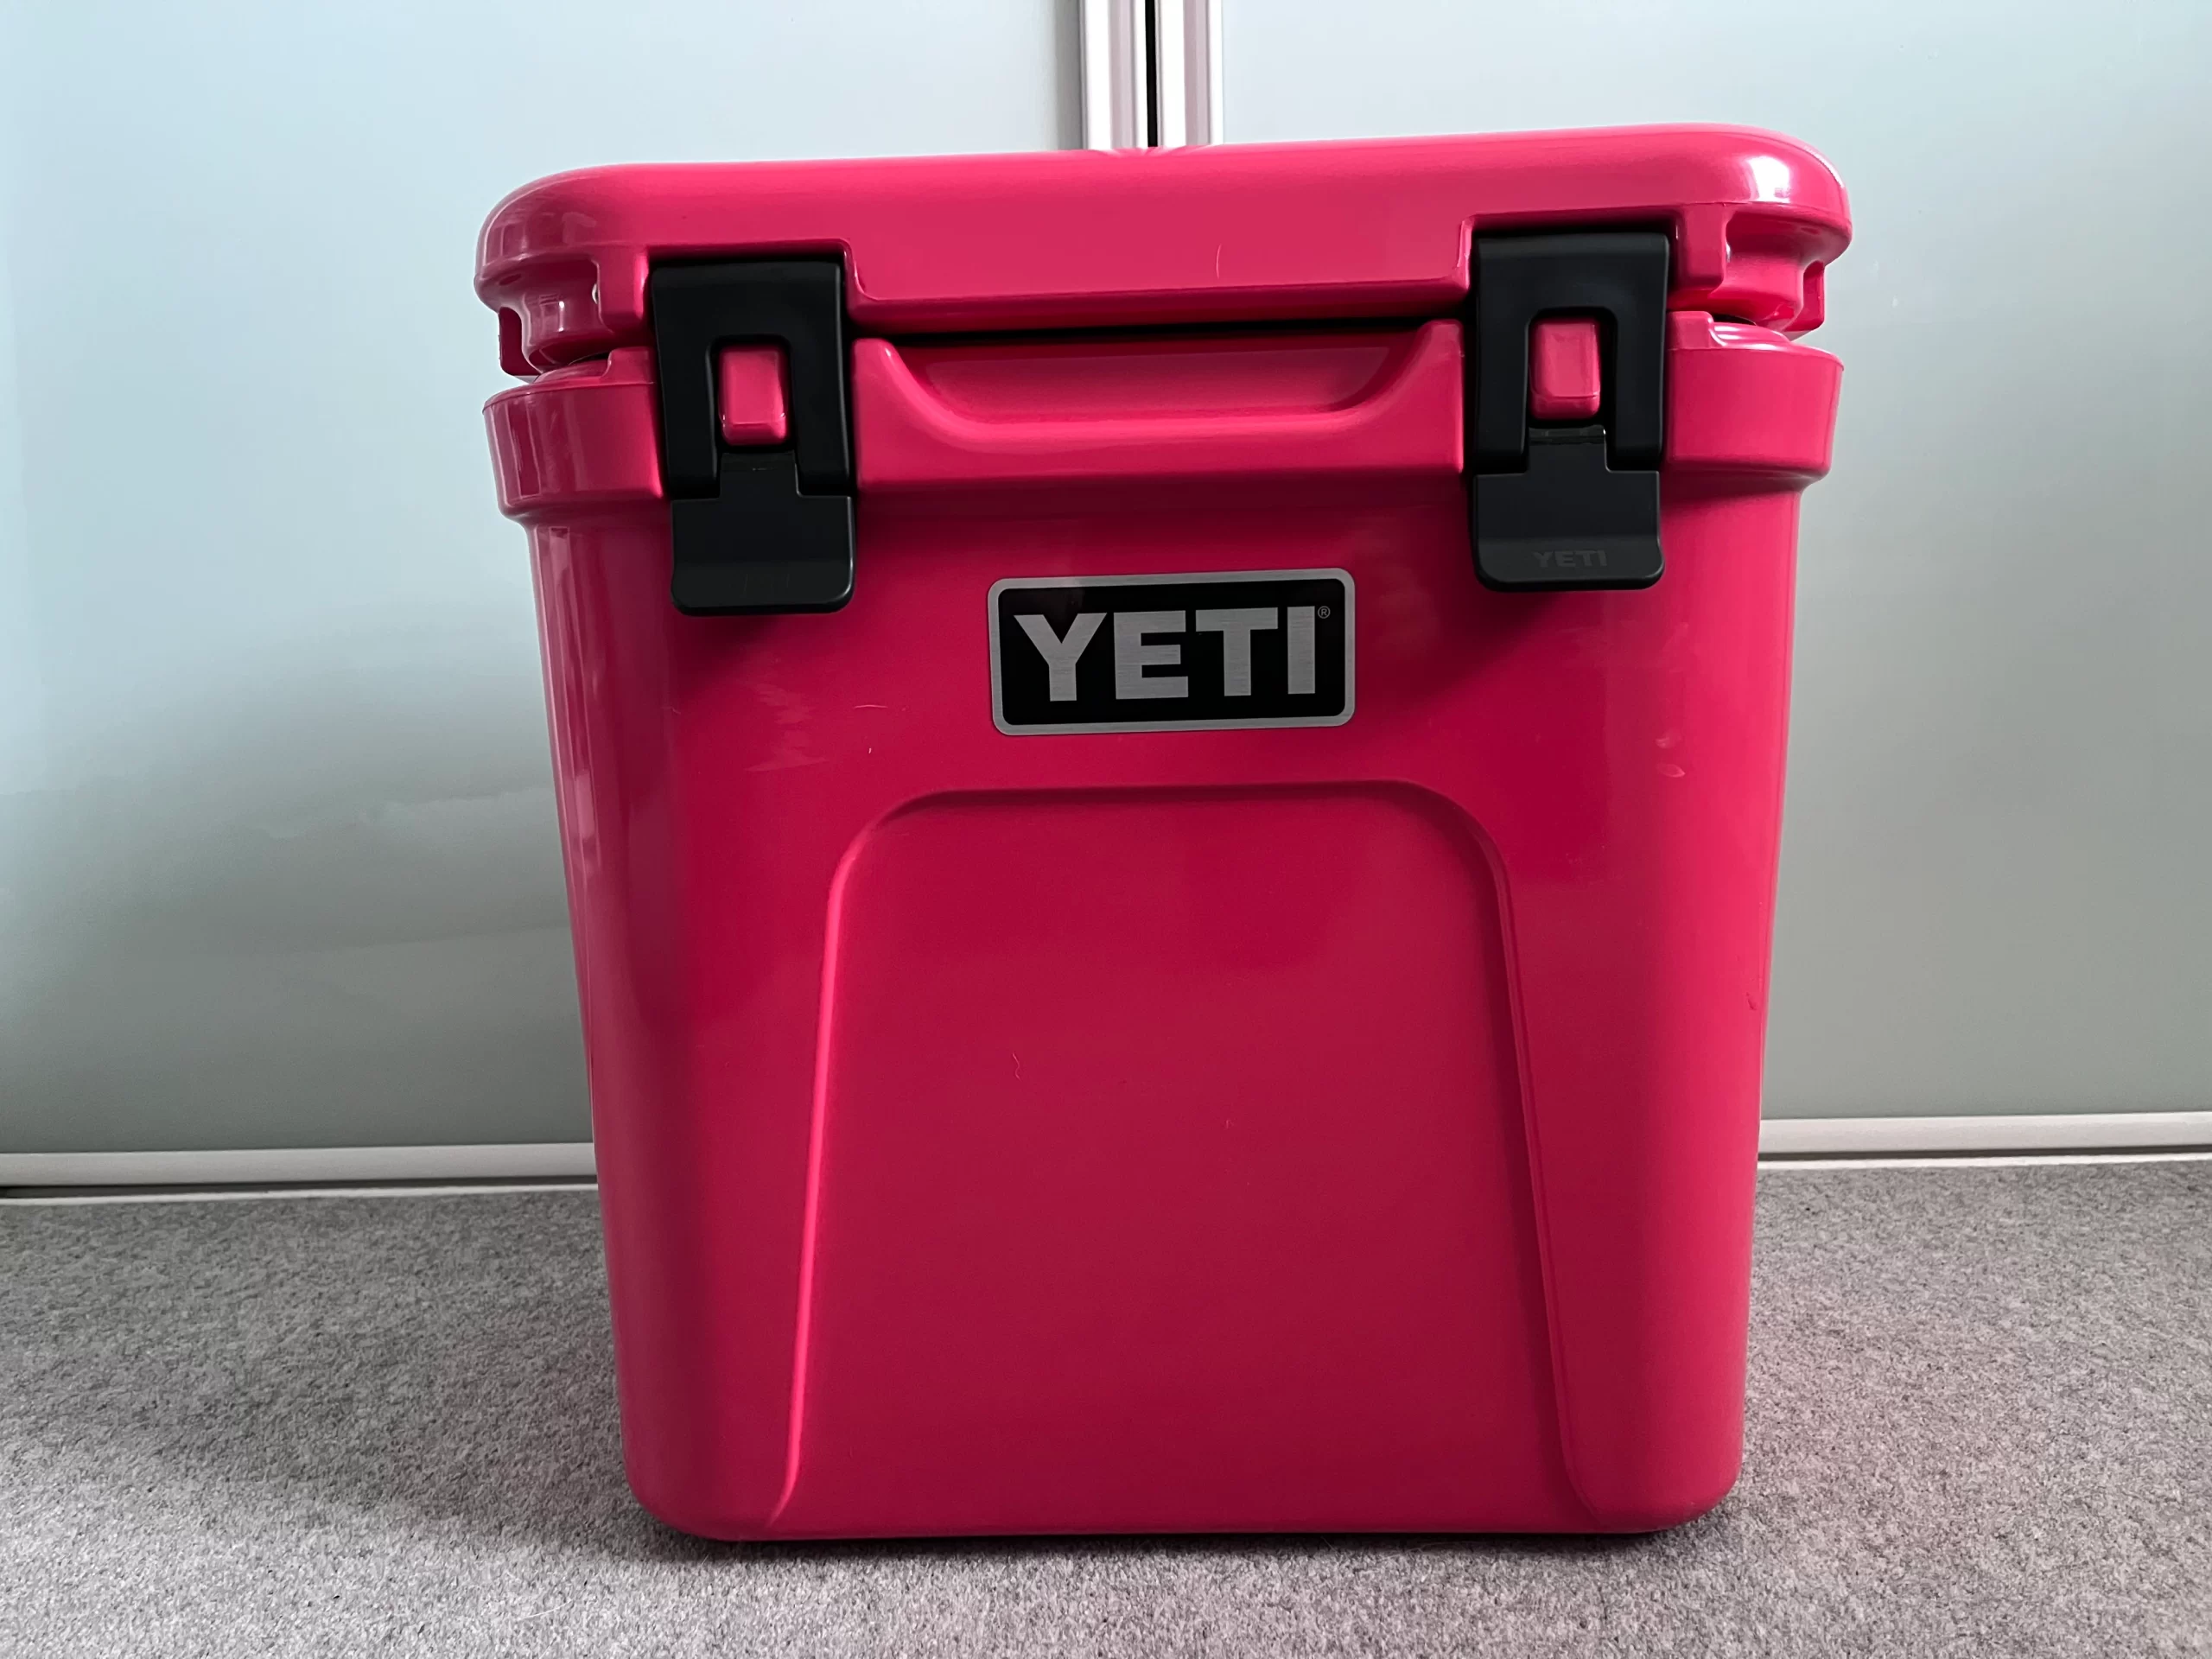 https://www.codewithmike.com/wp-content/uploads/2023/02/yeti-roadie-24-review-scaled.webp